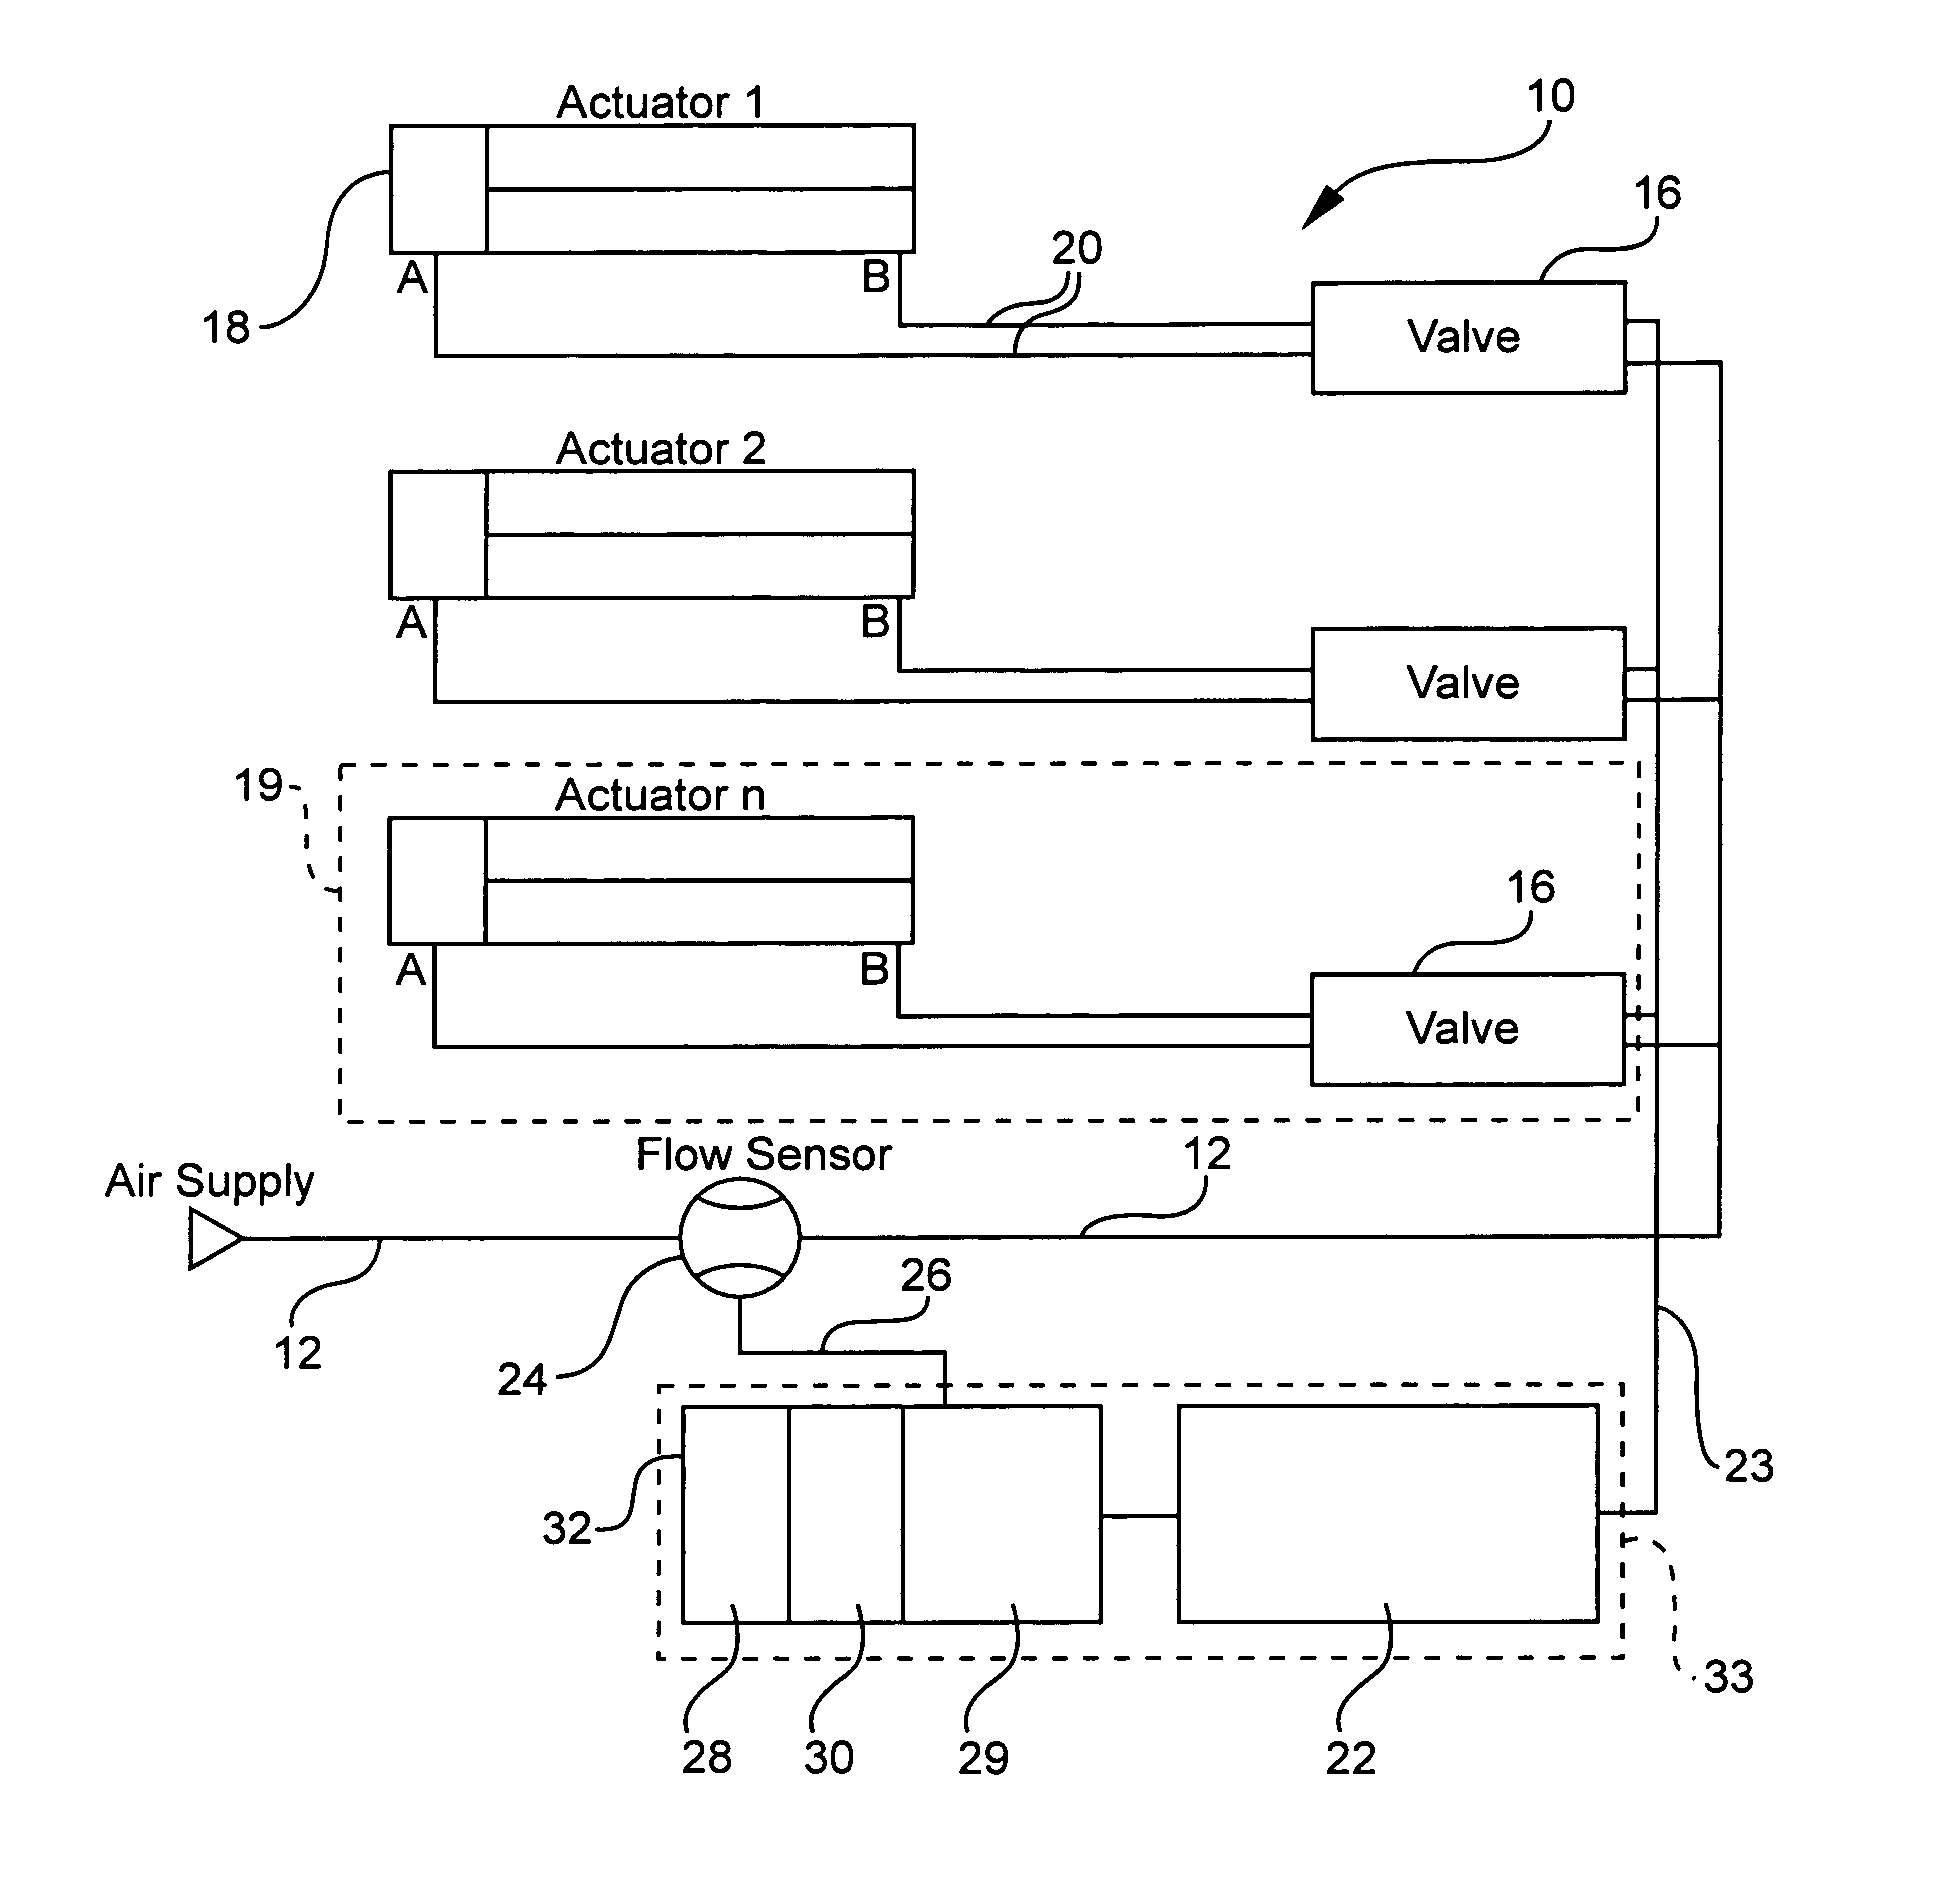 Method and apparatus for diagnosing leakage in a fluid power system